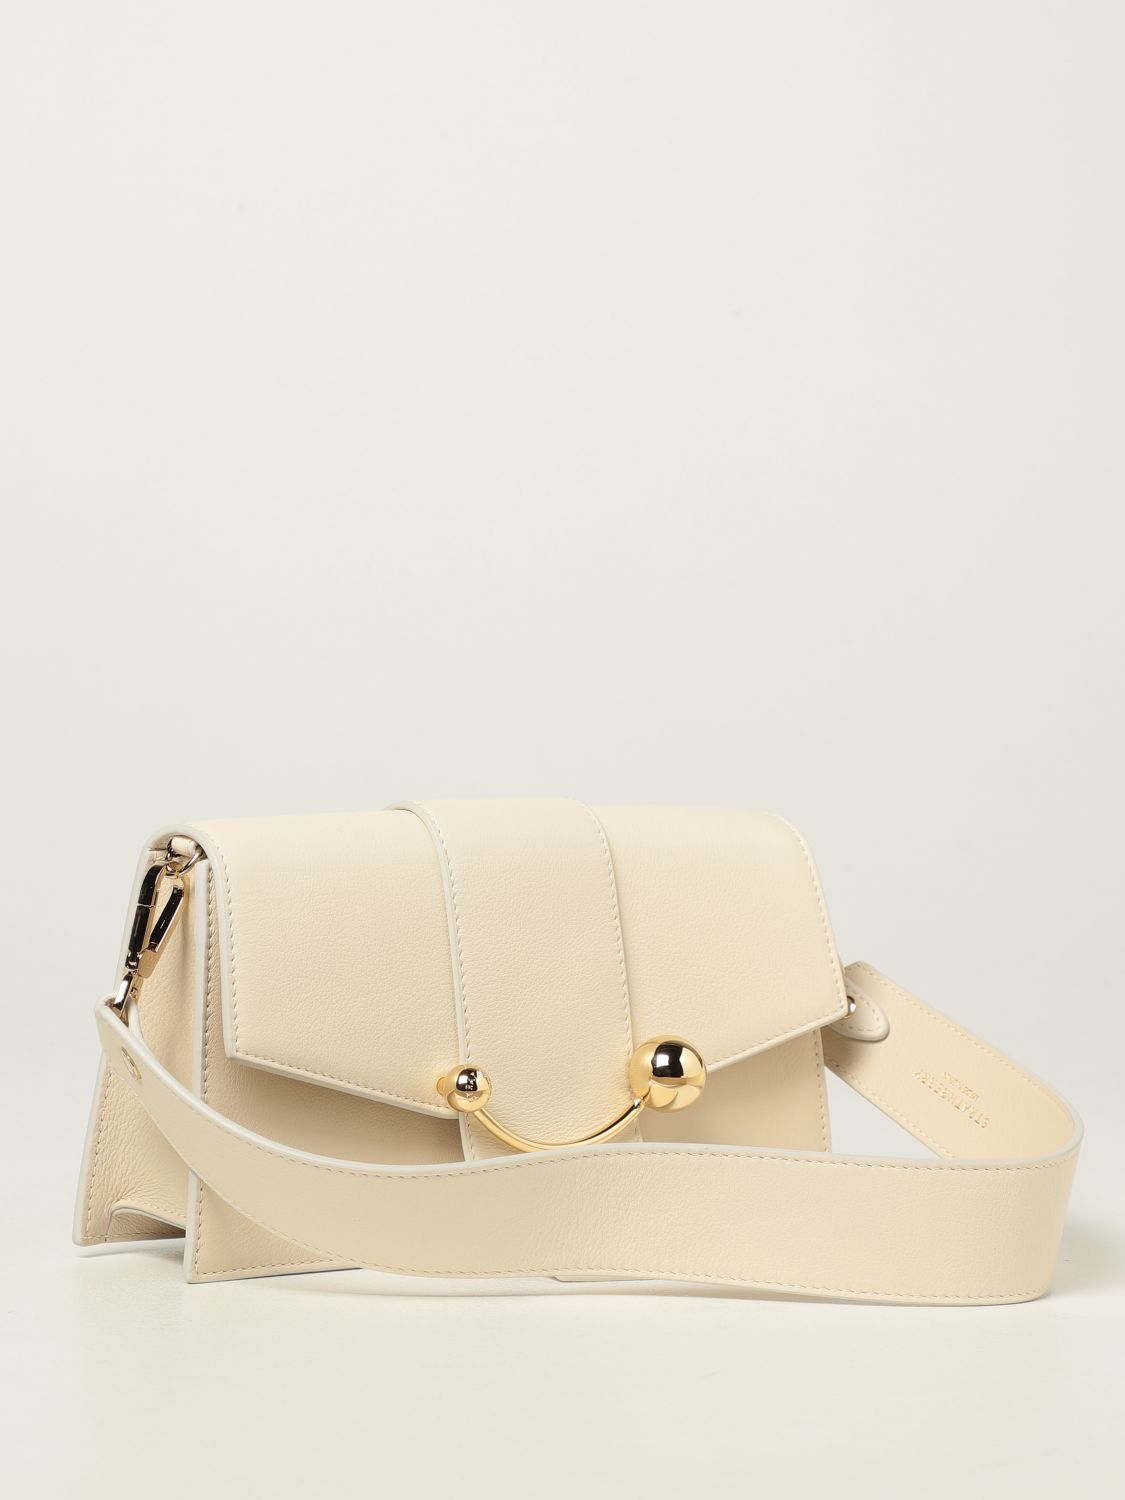 STRATHBERRY: Crescent Mini leather bag - Yellow Cream | Shoulder Bag ...